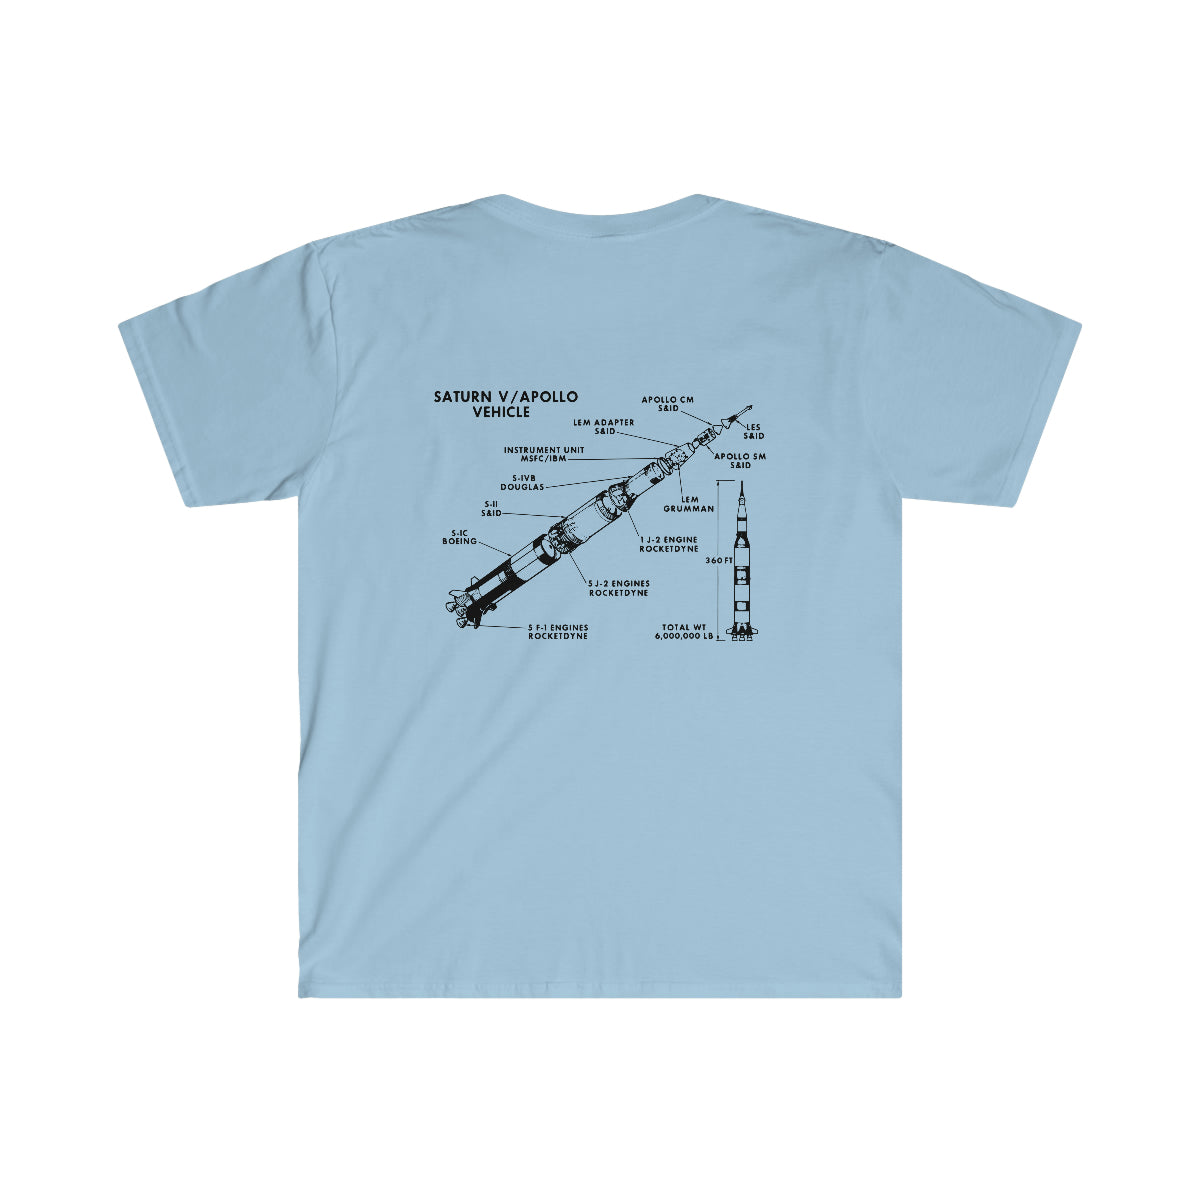 A light blue Saturn/Apollo Vehicle T-Shirt with a diagram of a rocket for space exploration.